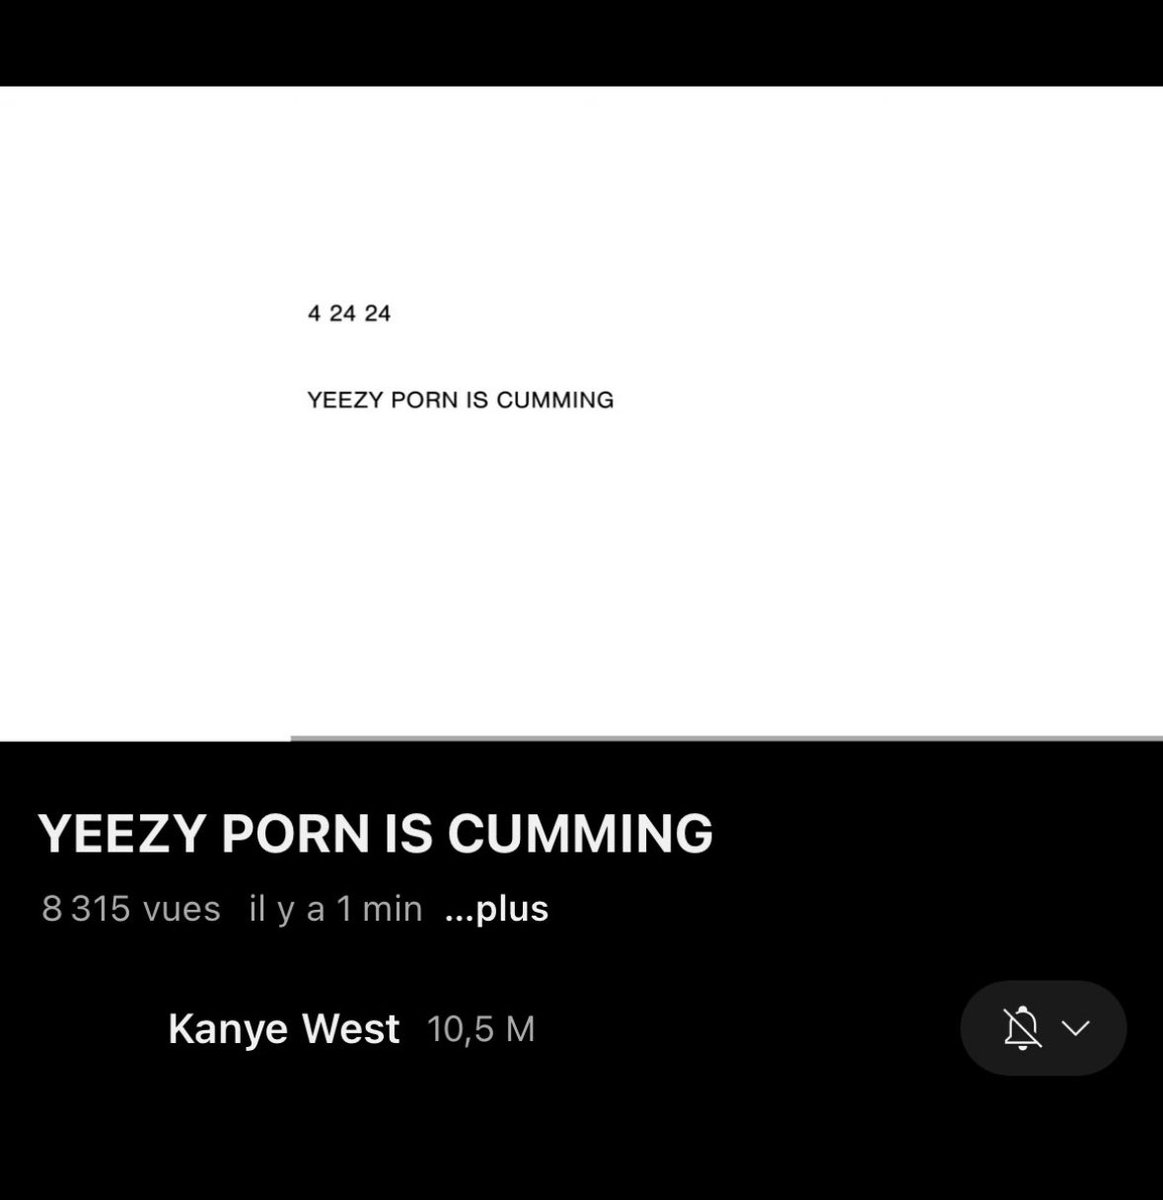 Ye just announced YEEZY P*RN on his YouTube channel